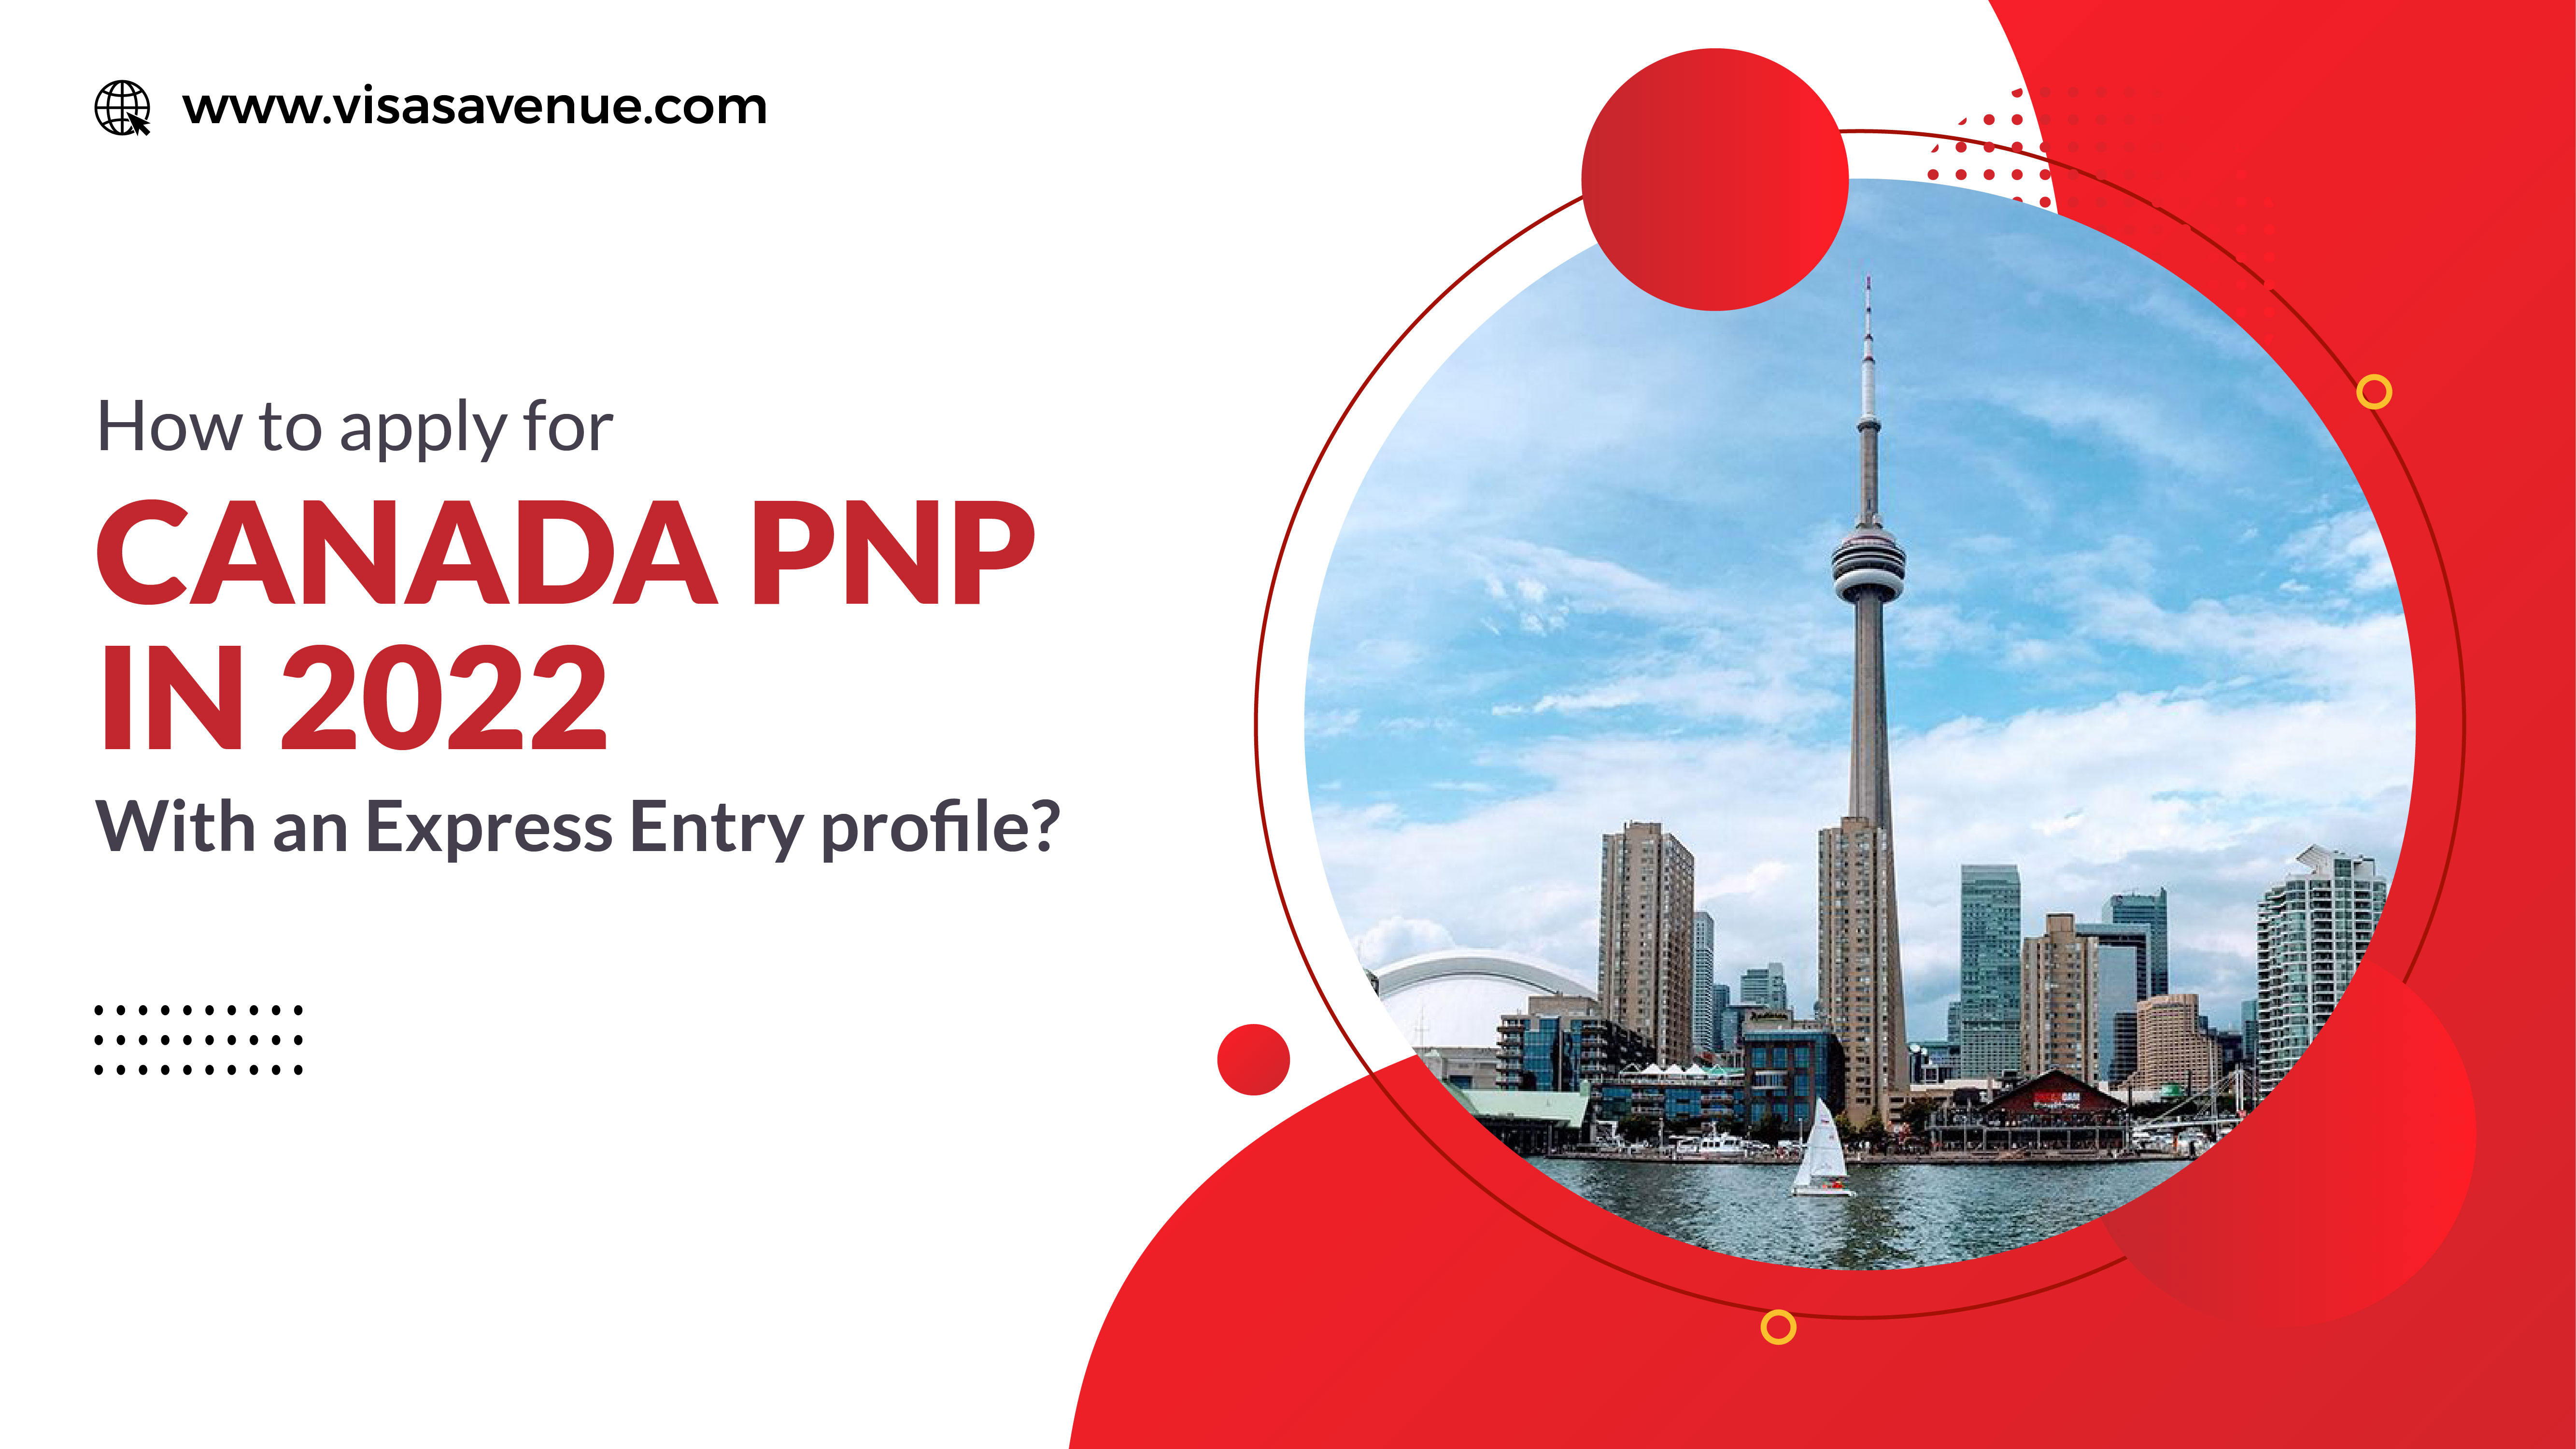 How to apply for Canada PNP in 2022 with an Express Entry Profile